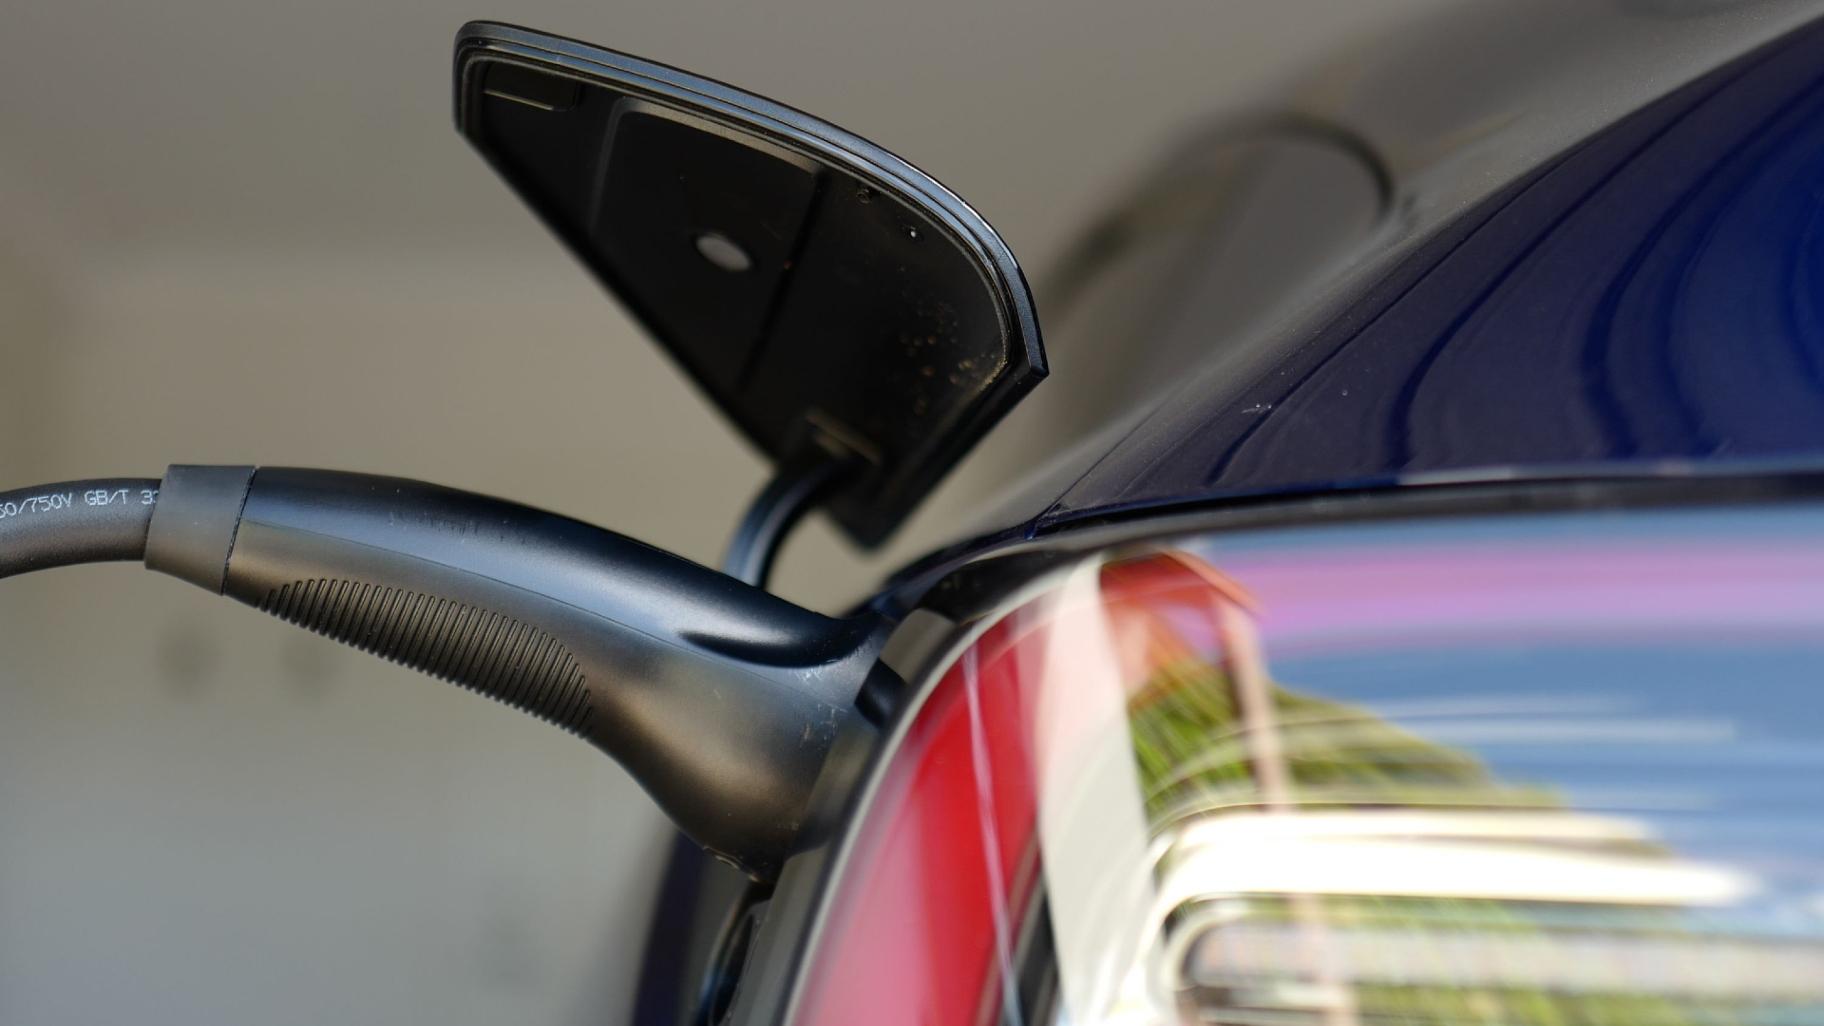 Starting next year, electric car buyers can get their tax credits at the time of purchase. (James D. Morgan / Getty Images)